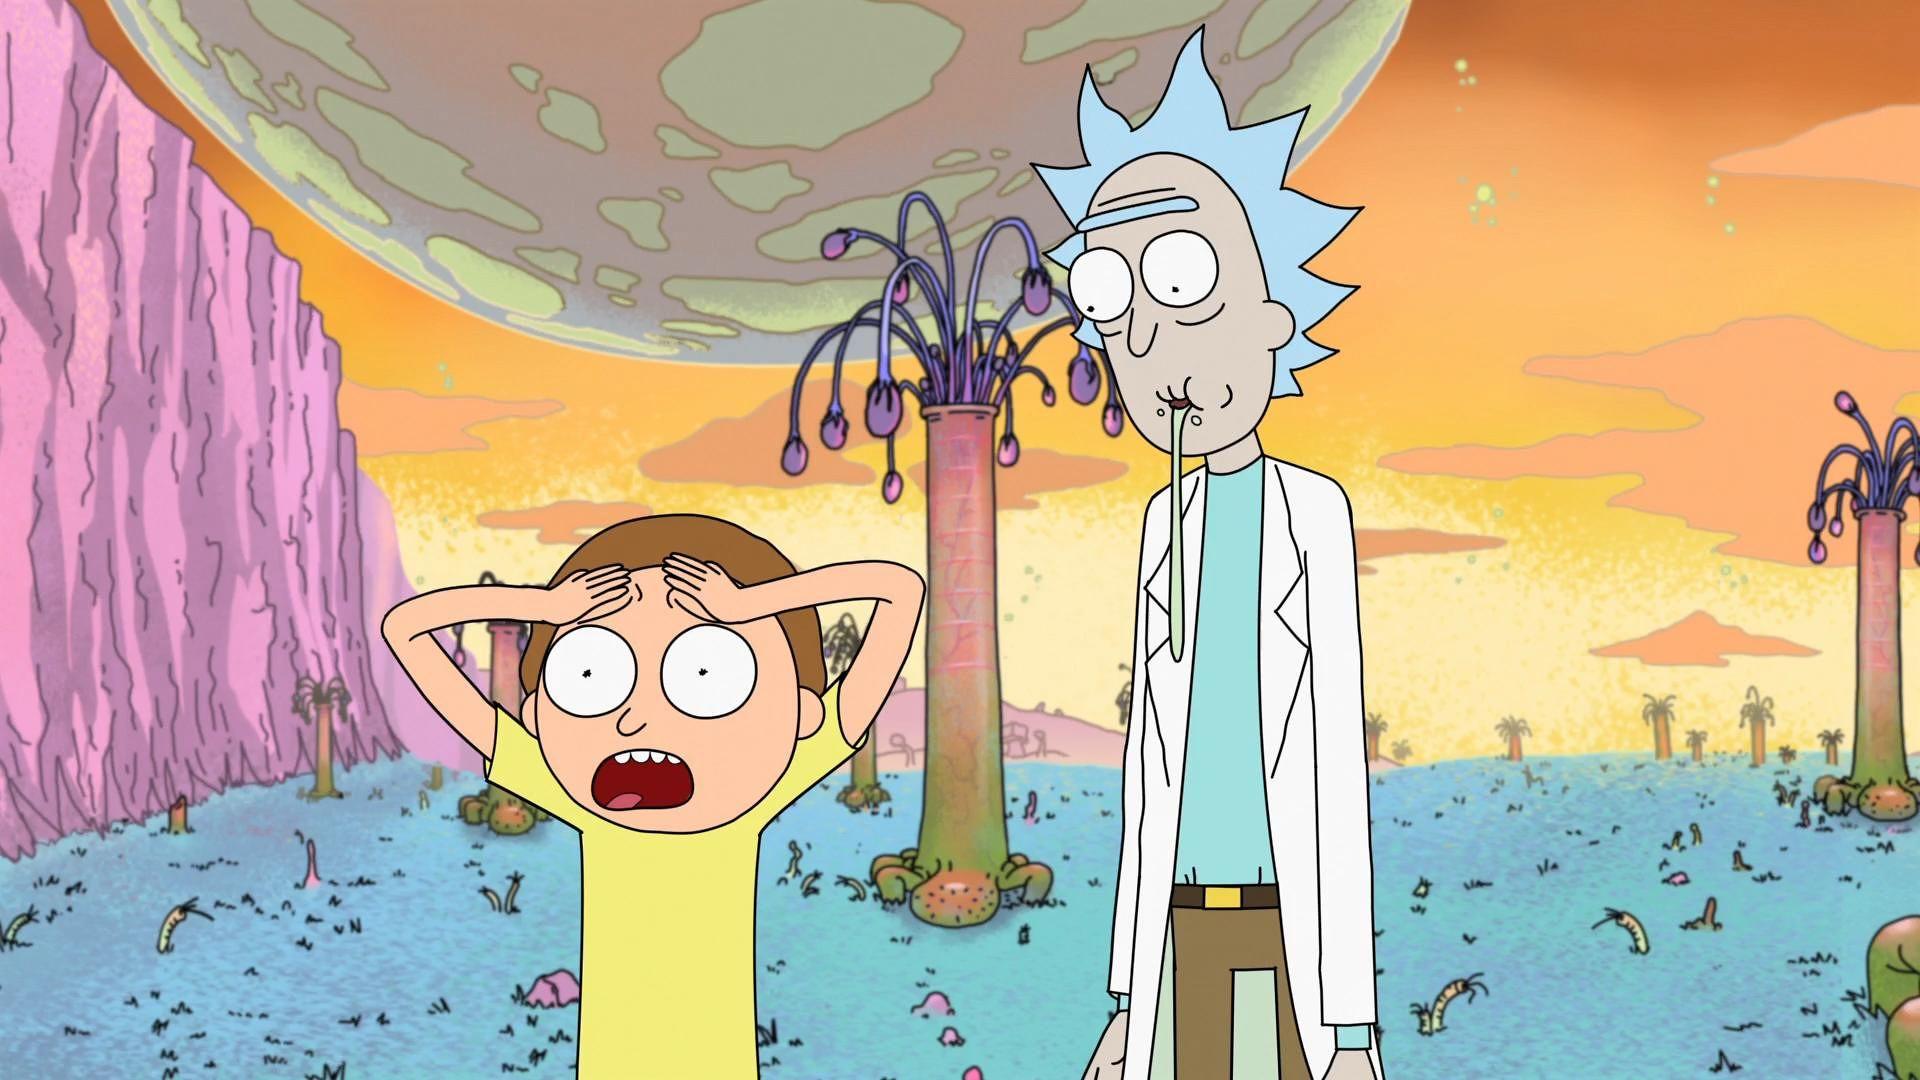 Rick and Morty Season 4 Premiere Date Announced in New